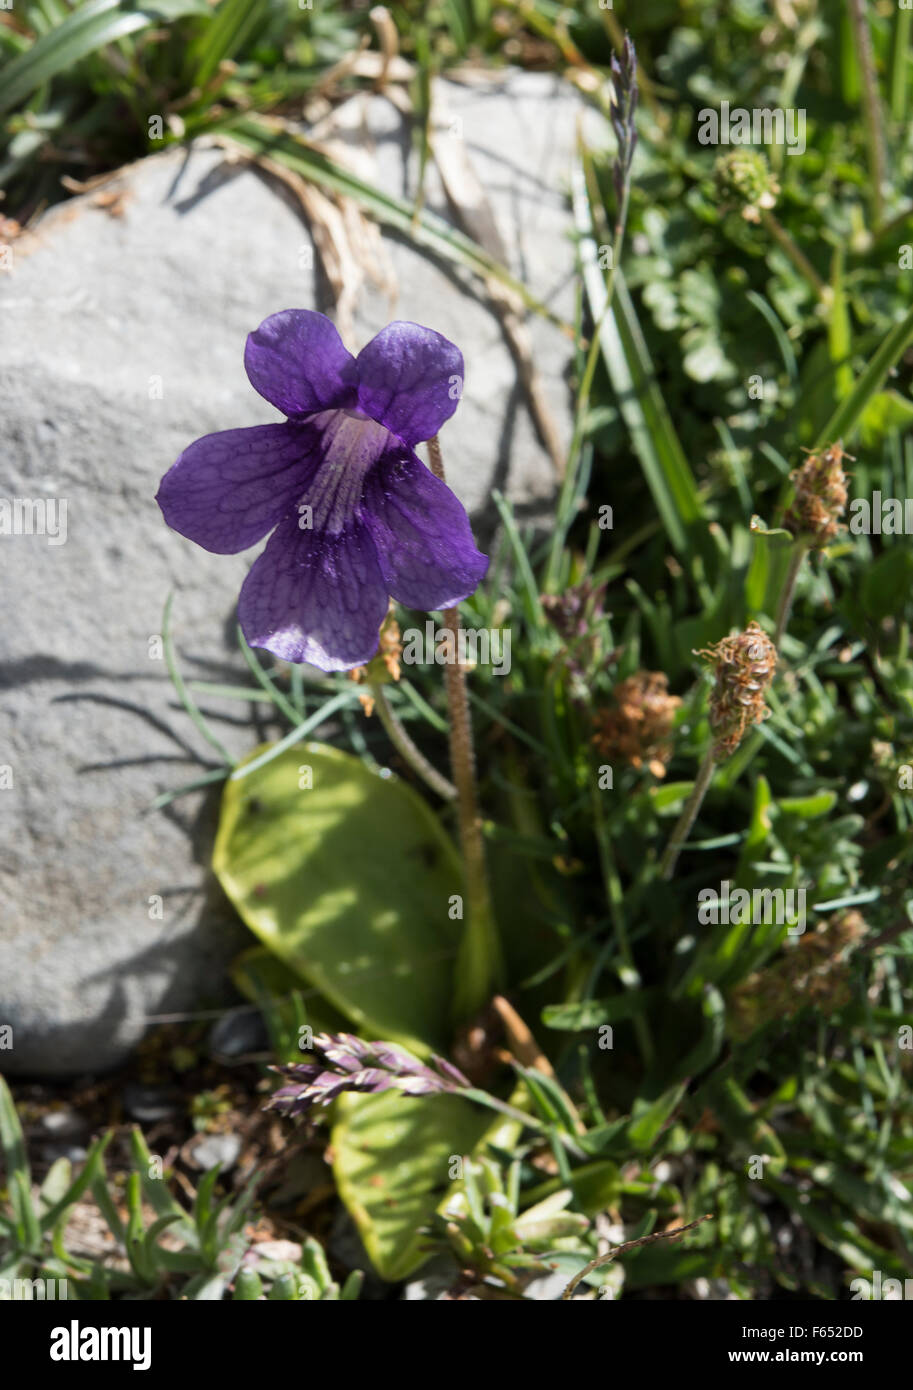 Pinguicula grandiflora, Large-flowered Butterwort, growing by a stream in the Pyrenees, Spain. July. Stock Photo